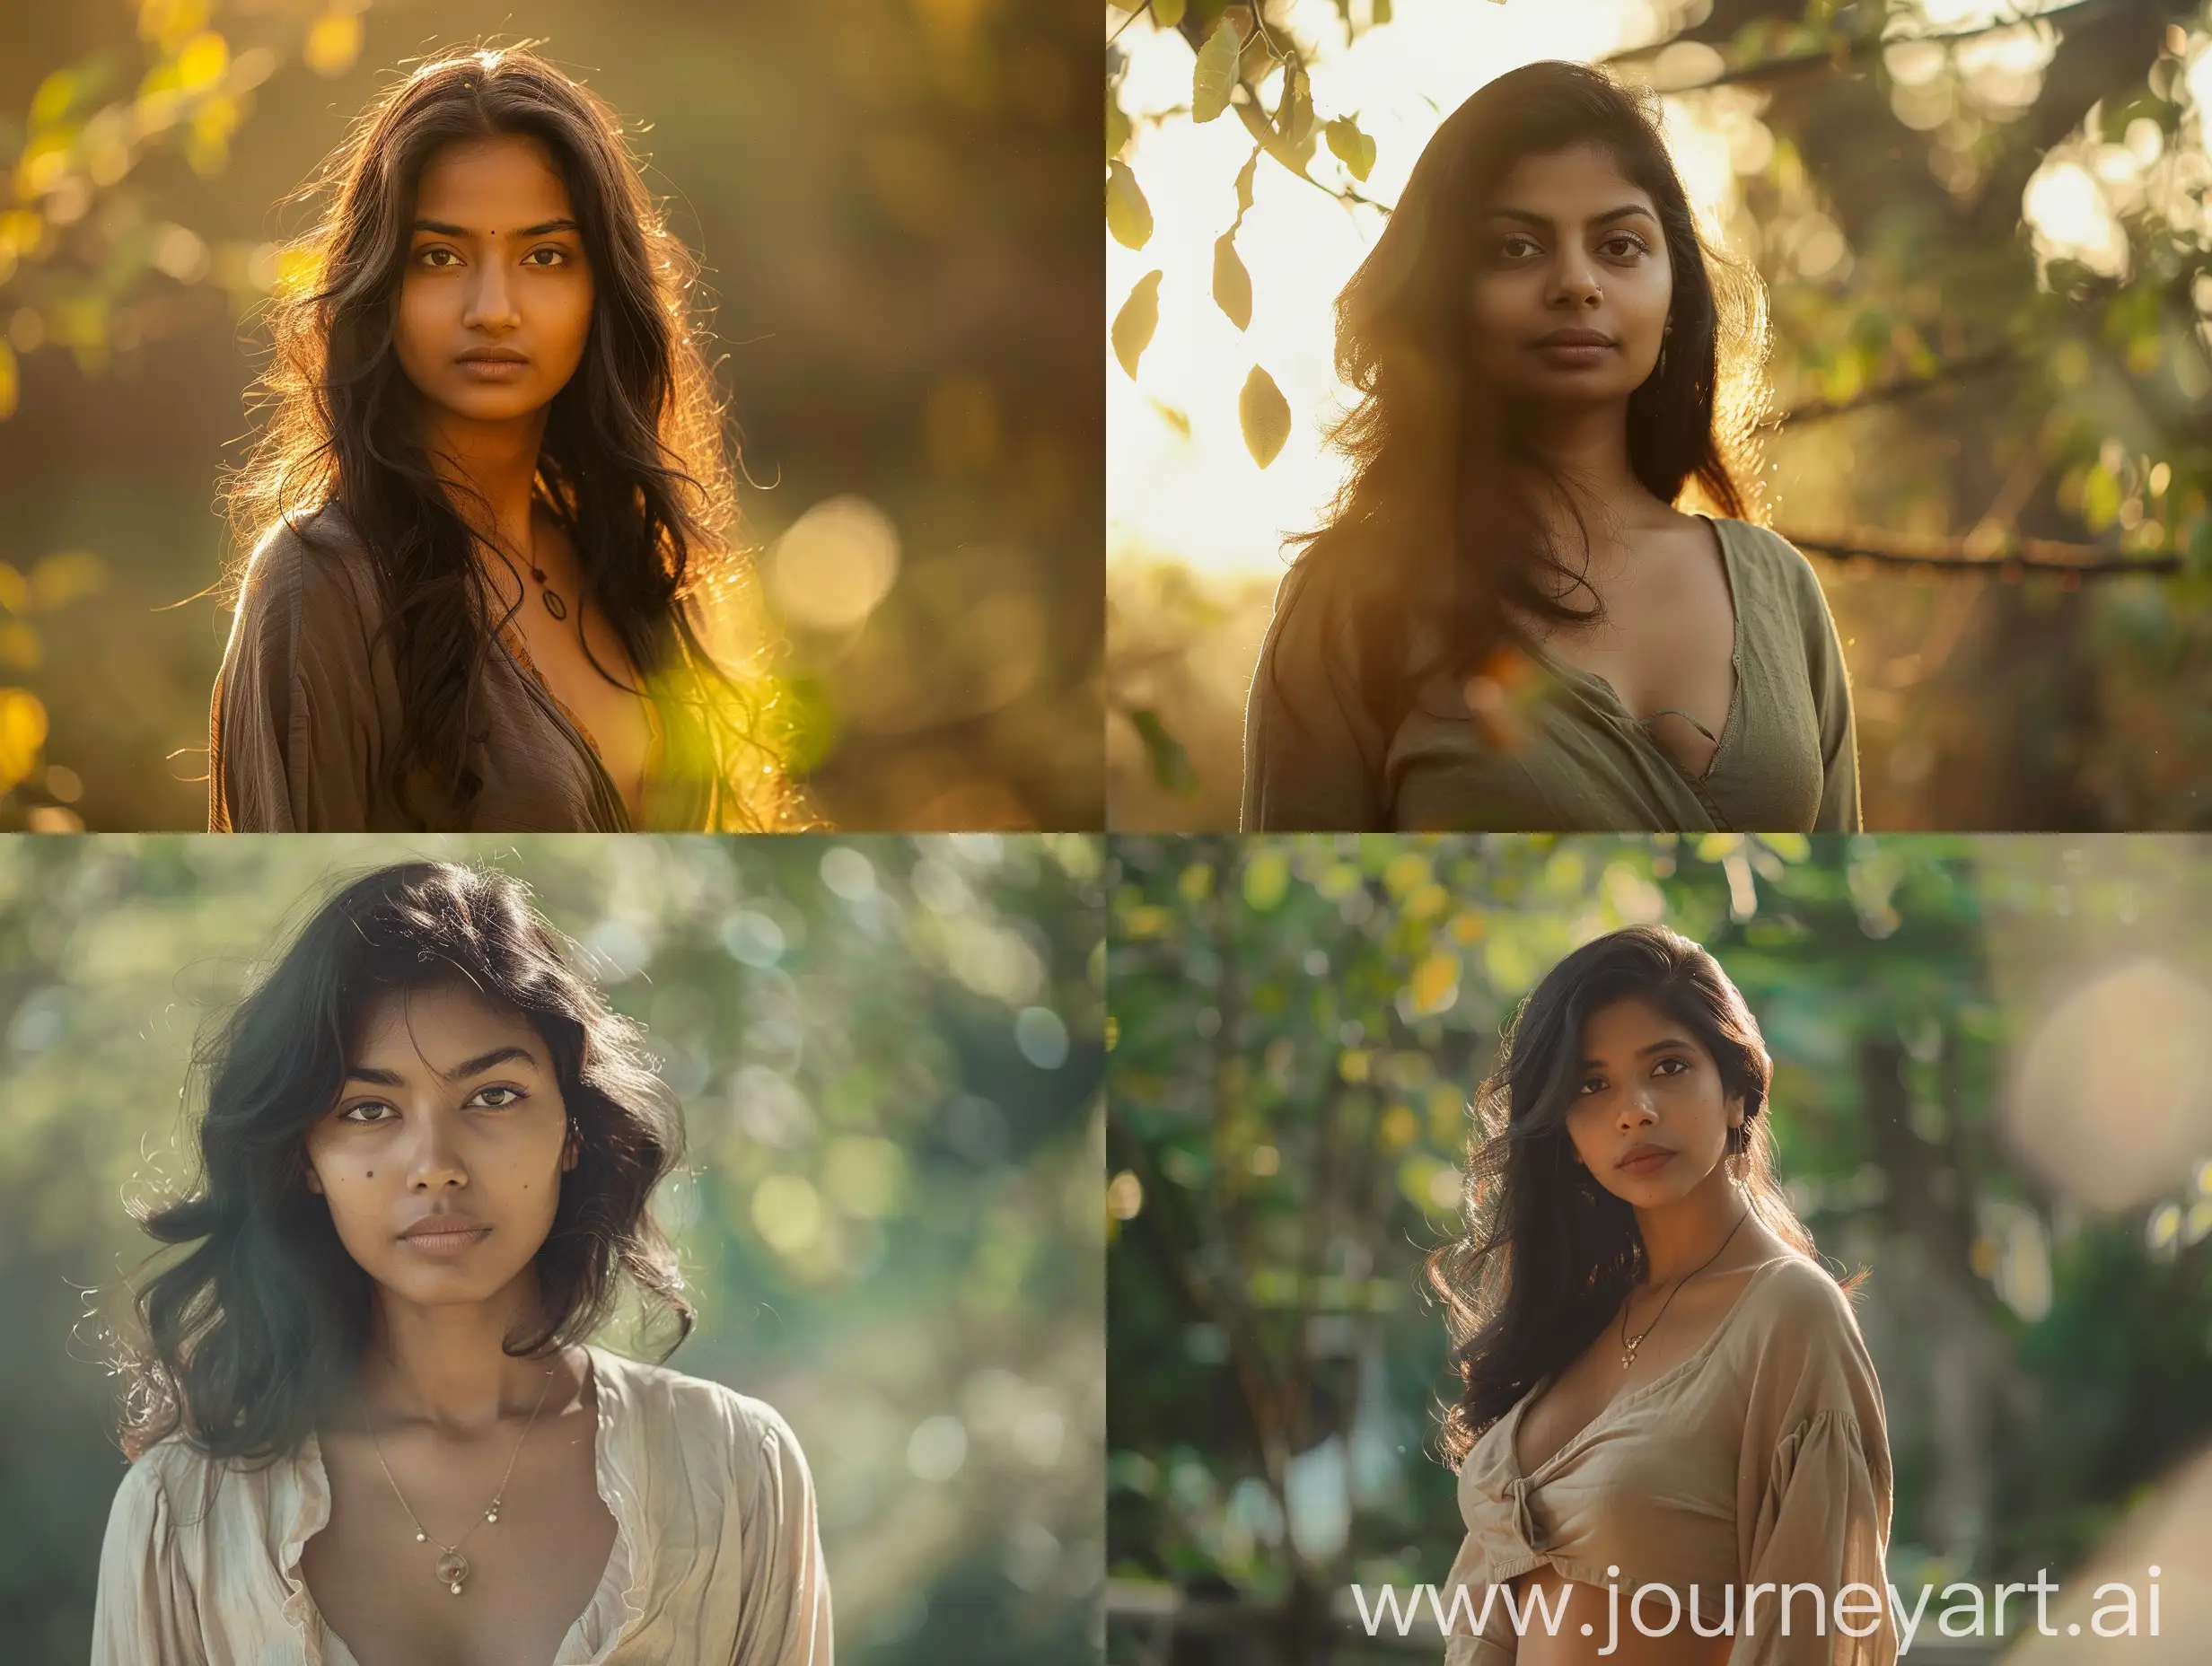 Graceful-Indian-Woman-in-Earthy-Tones-and-Subtle-Warmth